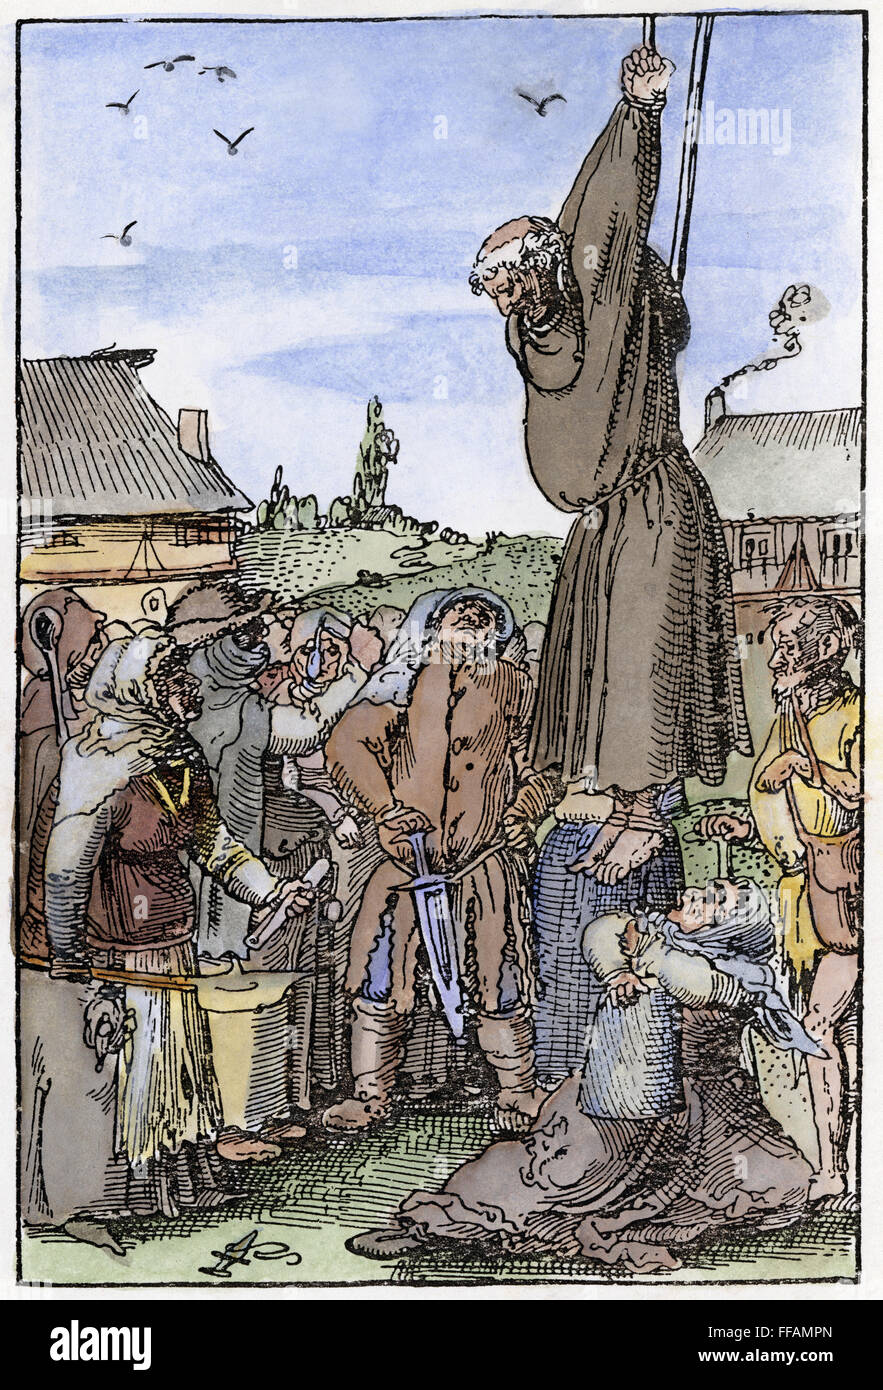 PEASANT MOB, 1525. /nPeasants in Switzerland hanging a vendor of indulgences during the Reformation. Woodcut, 1525, by Niklaus Manuel Deutsch. Stock Photo